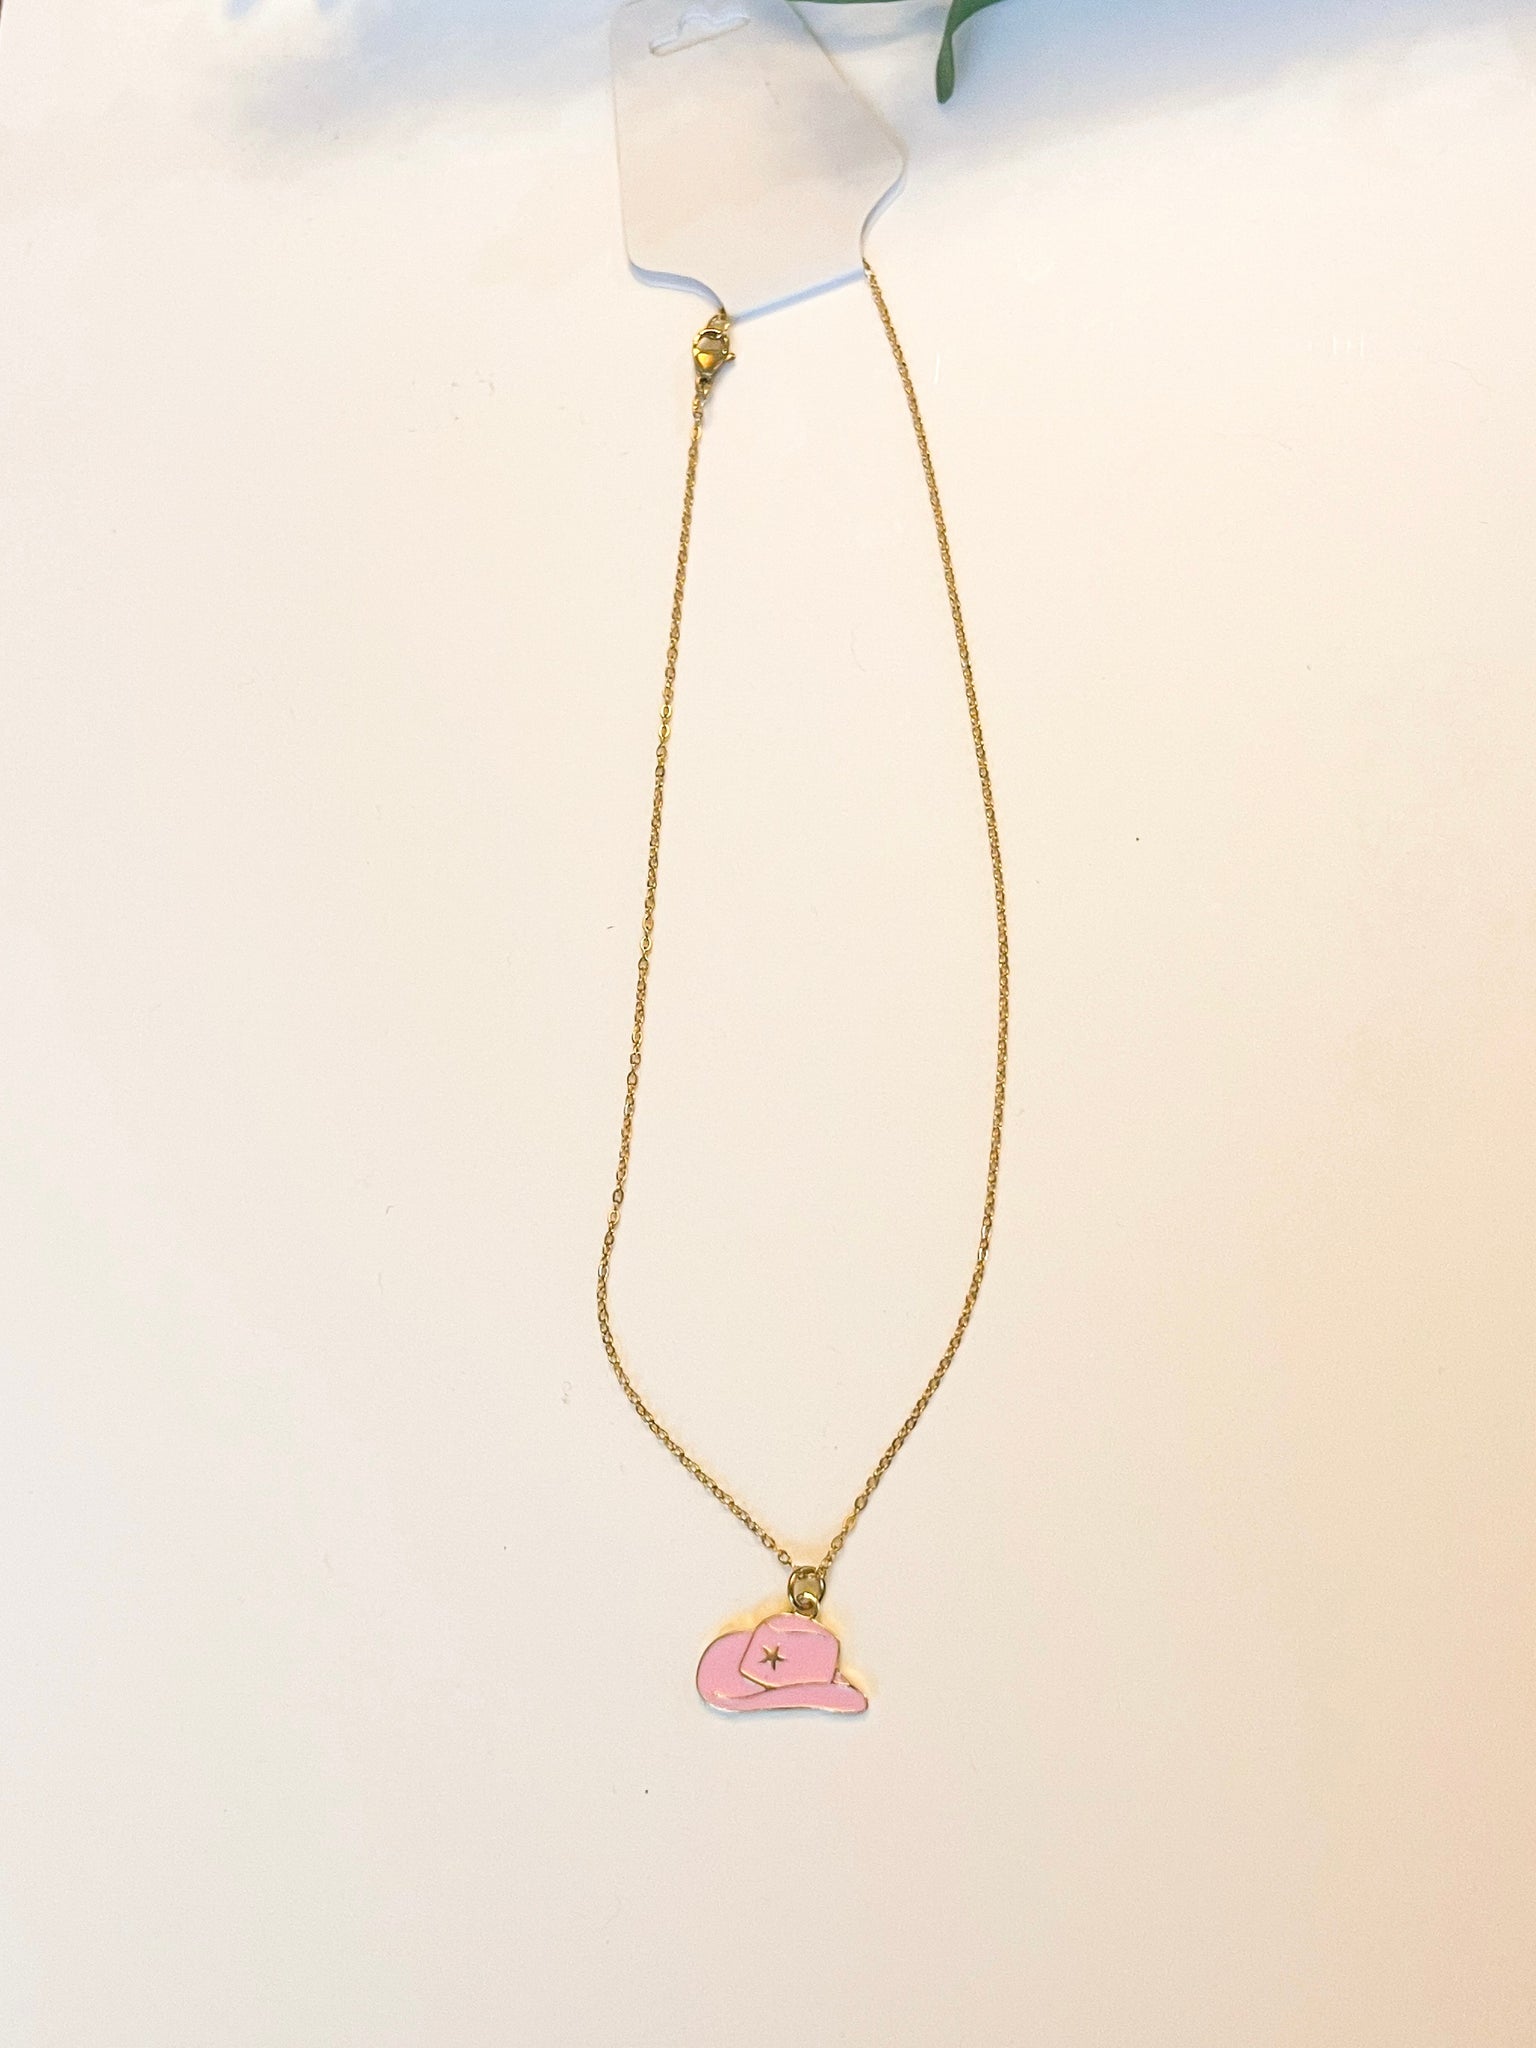 Pink Hat Necklace 17”